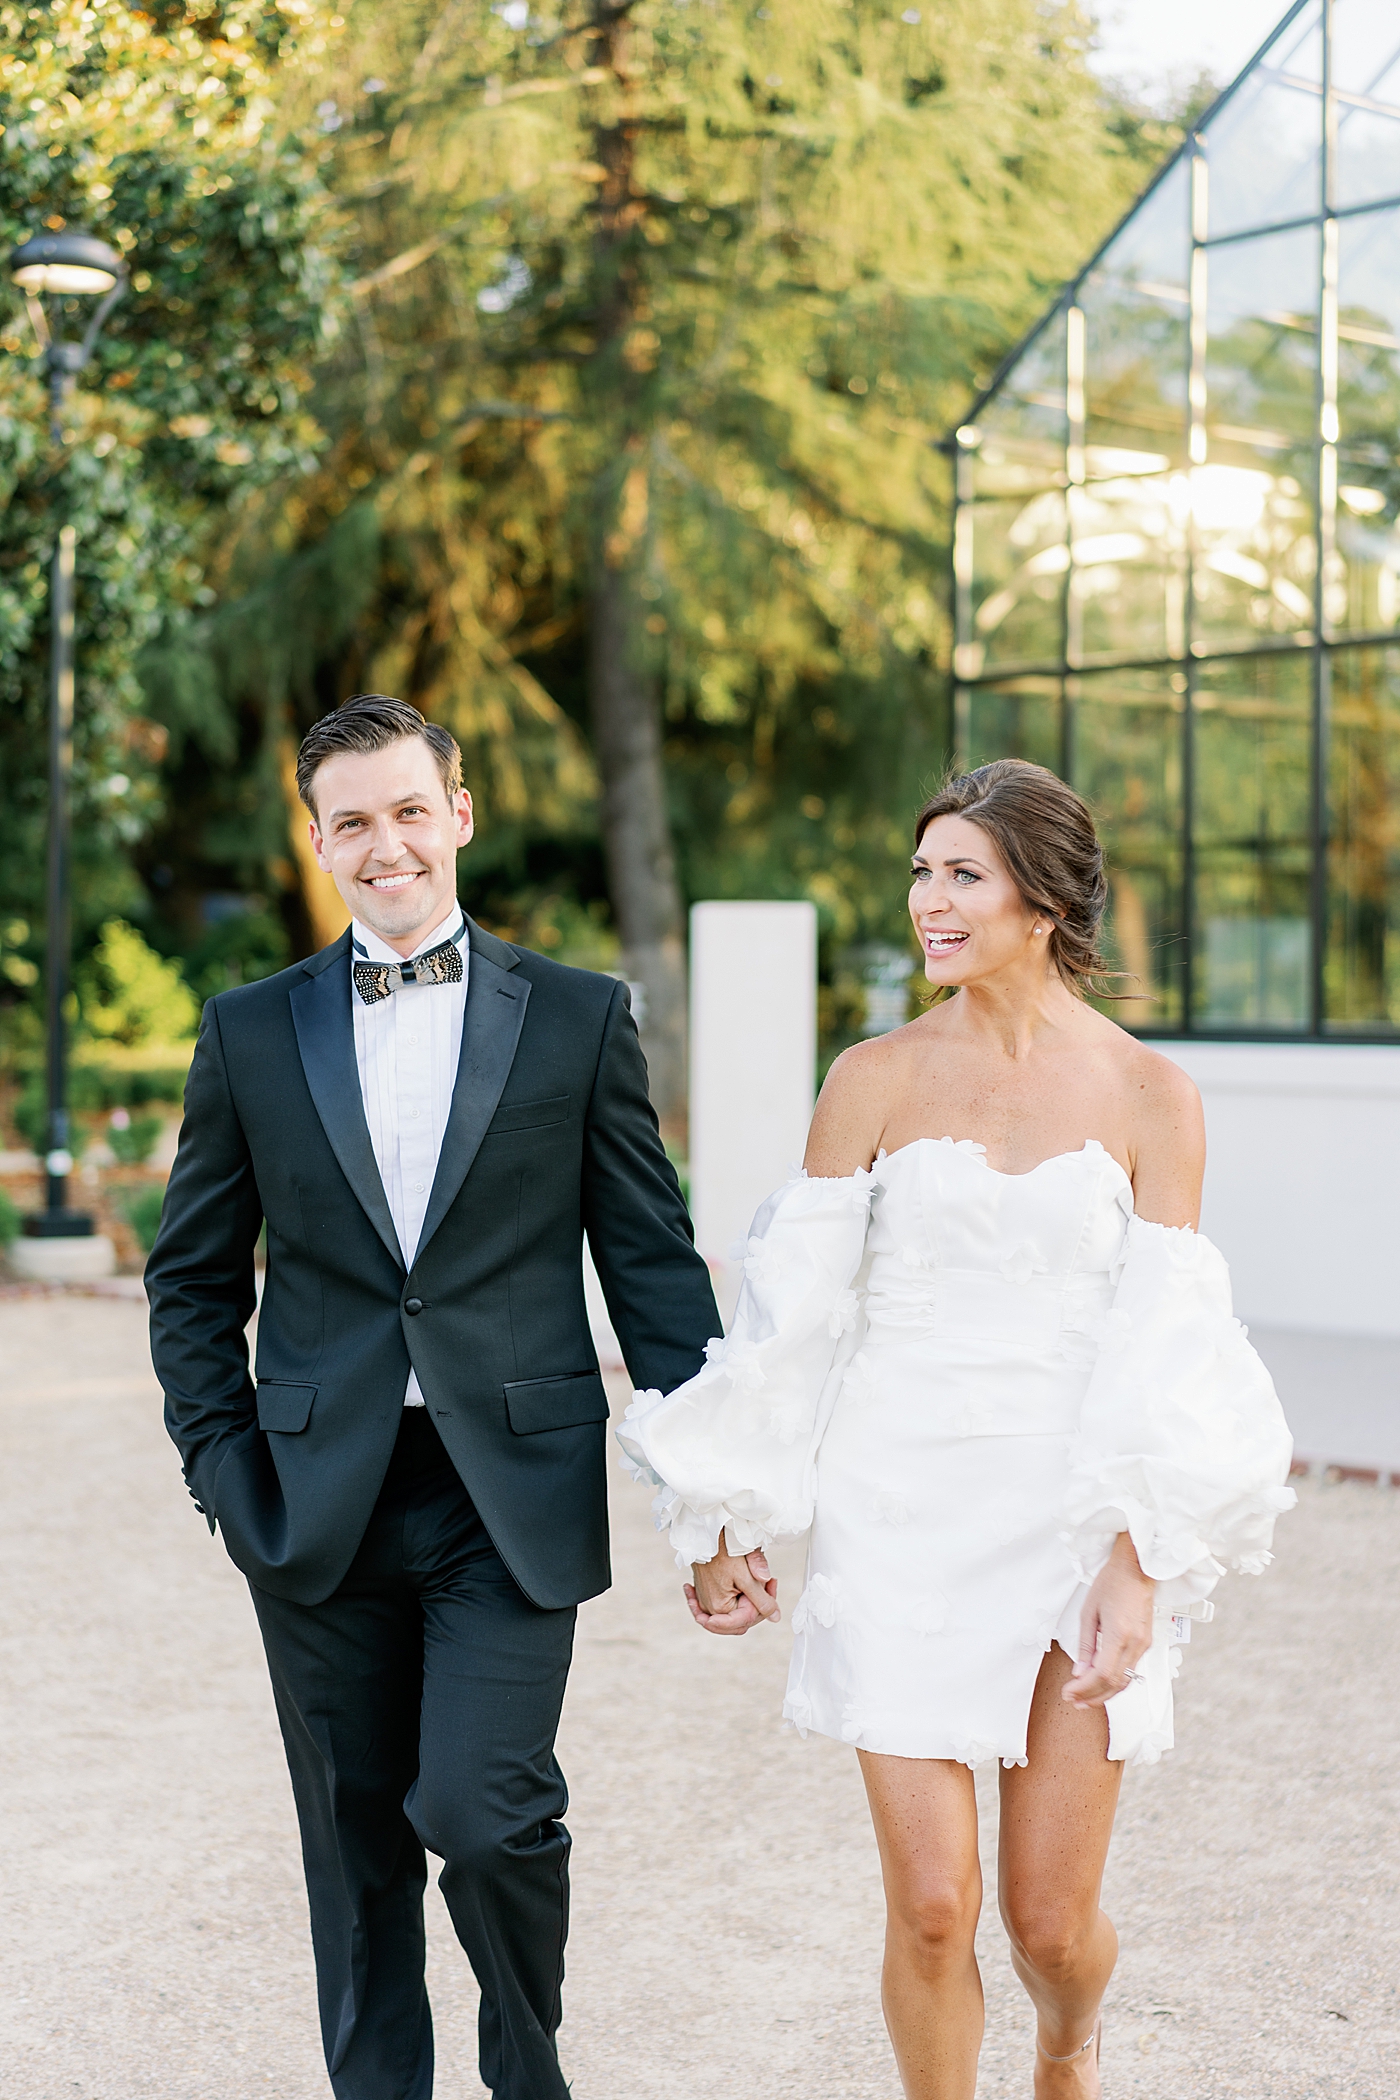 Bride and groom walking holding hands | Photo by Annie Laura Photo